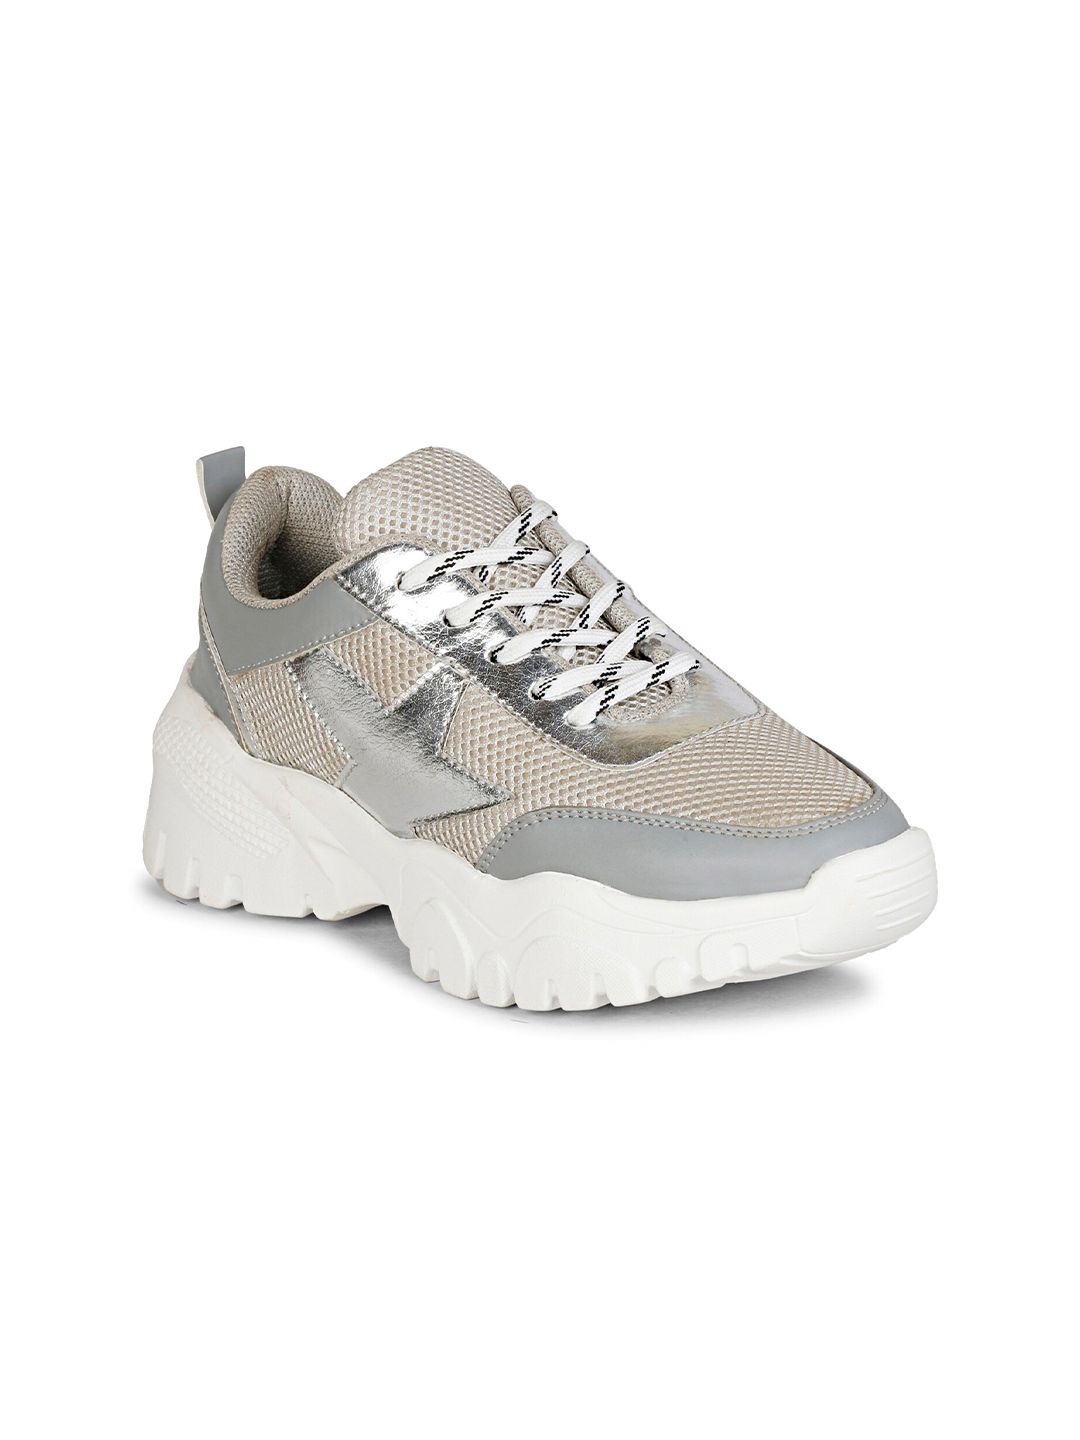 Denill Women Grey Running Fashionable Sports Shoes Price in India